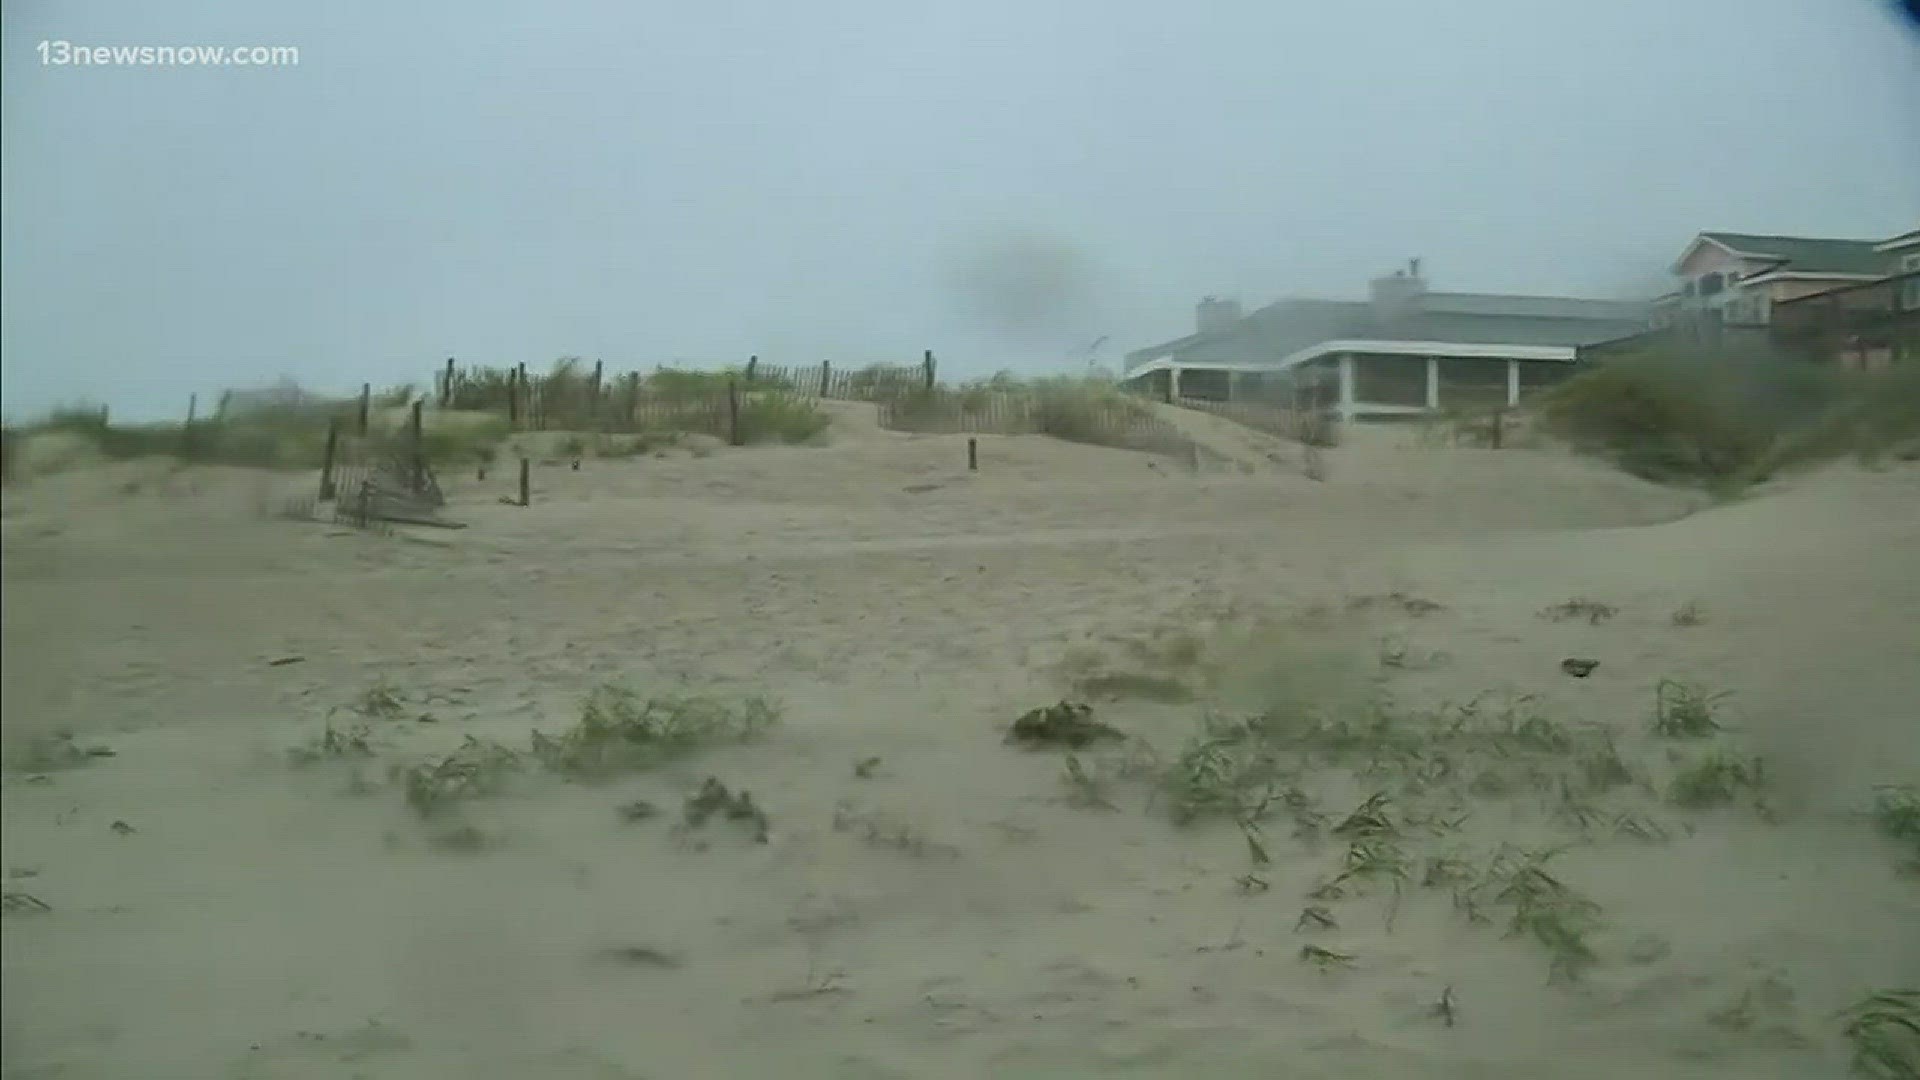 The Outer Banks are feeling the effects of Hurricane Florence